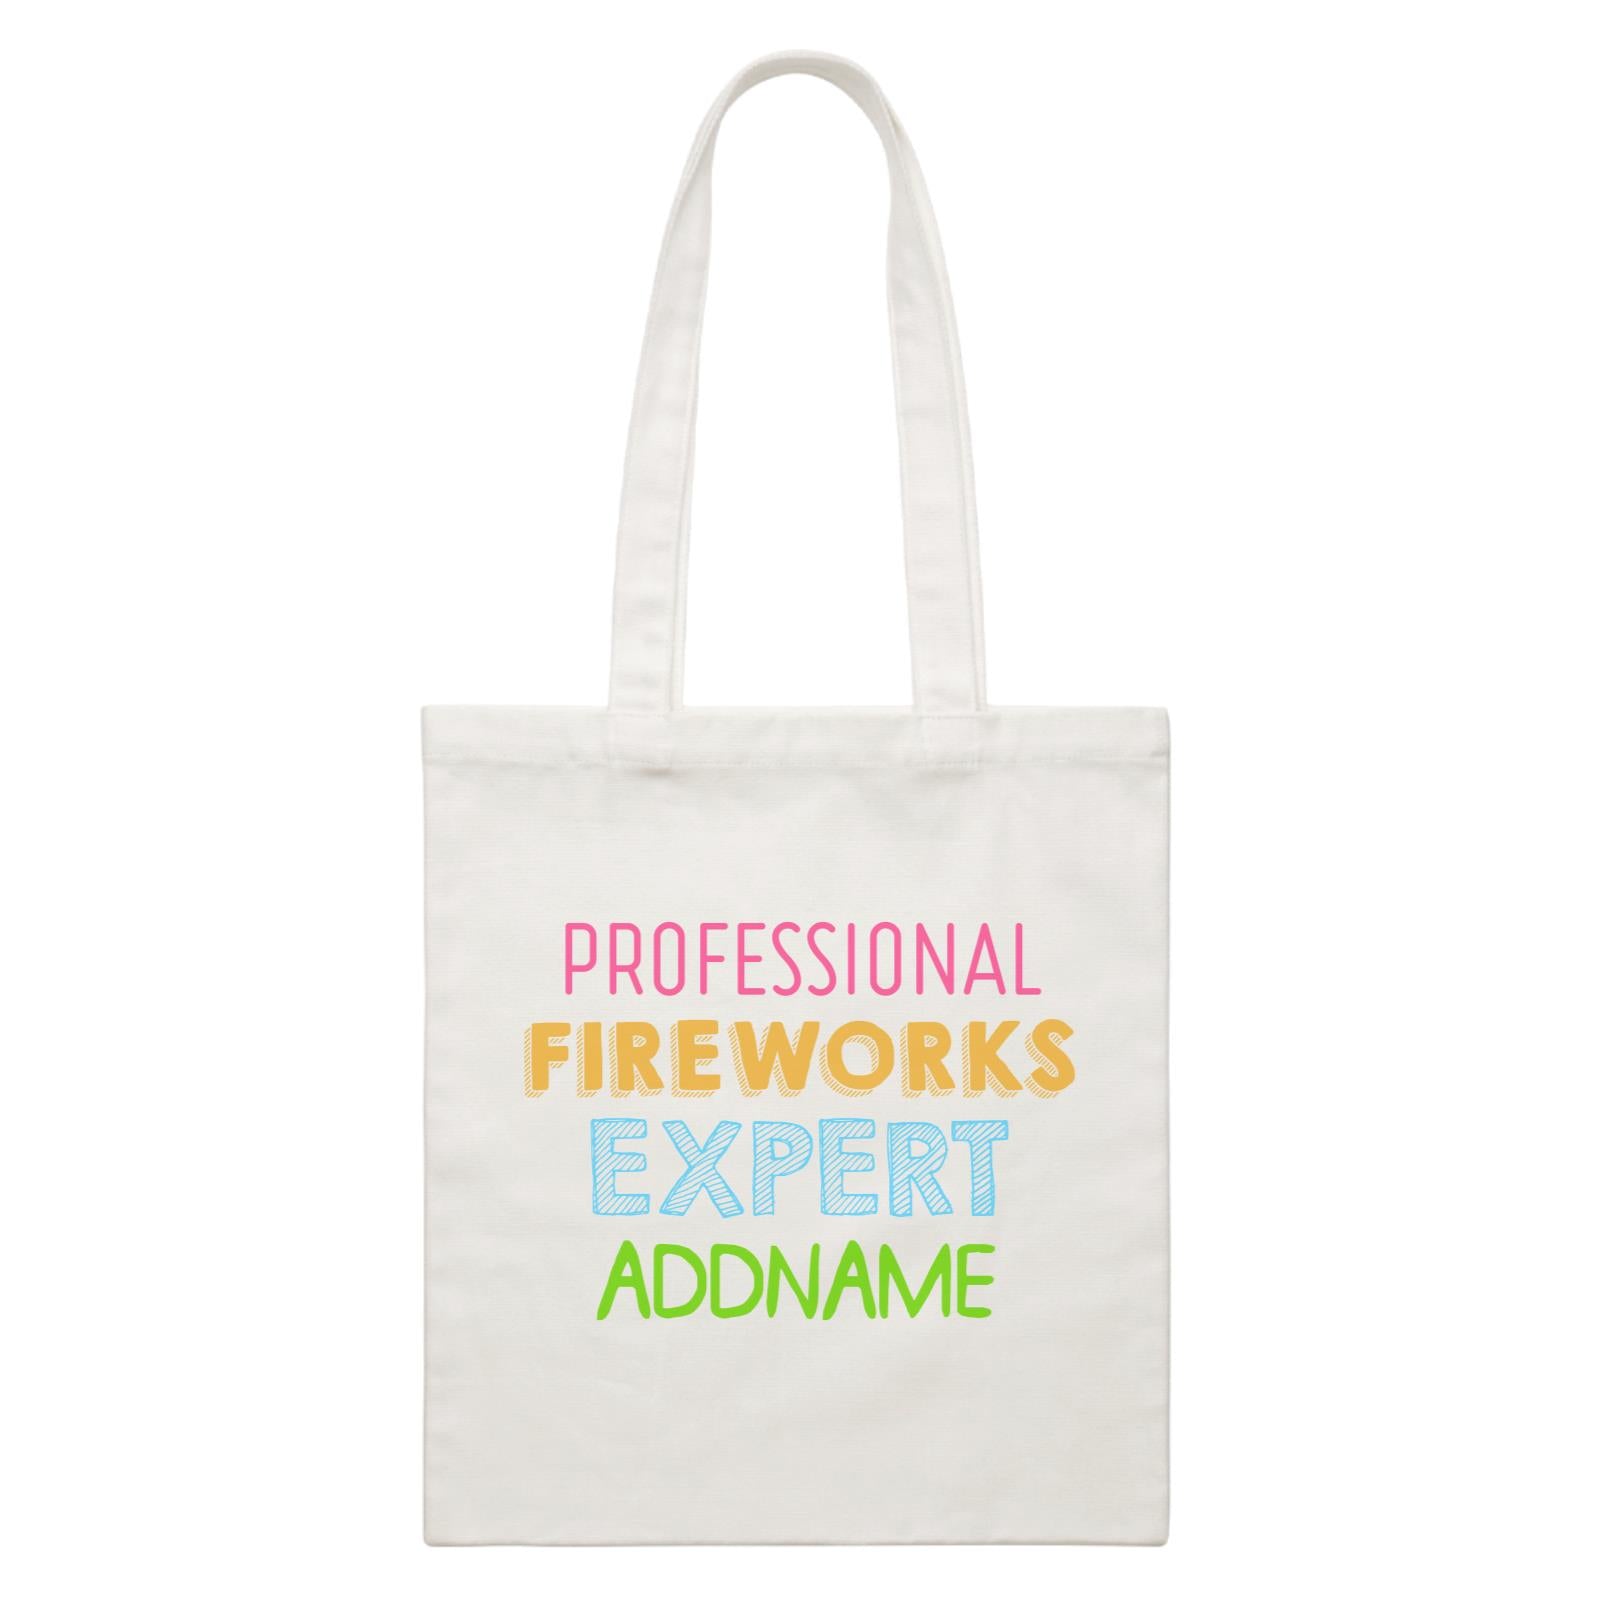 Professional Fireworks Expert Addname White Canvas Bag